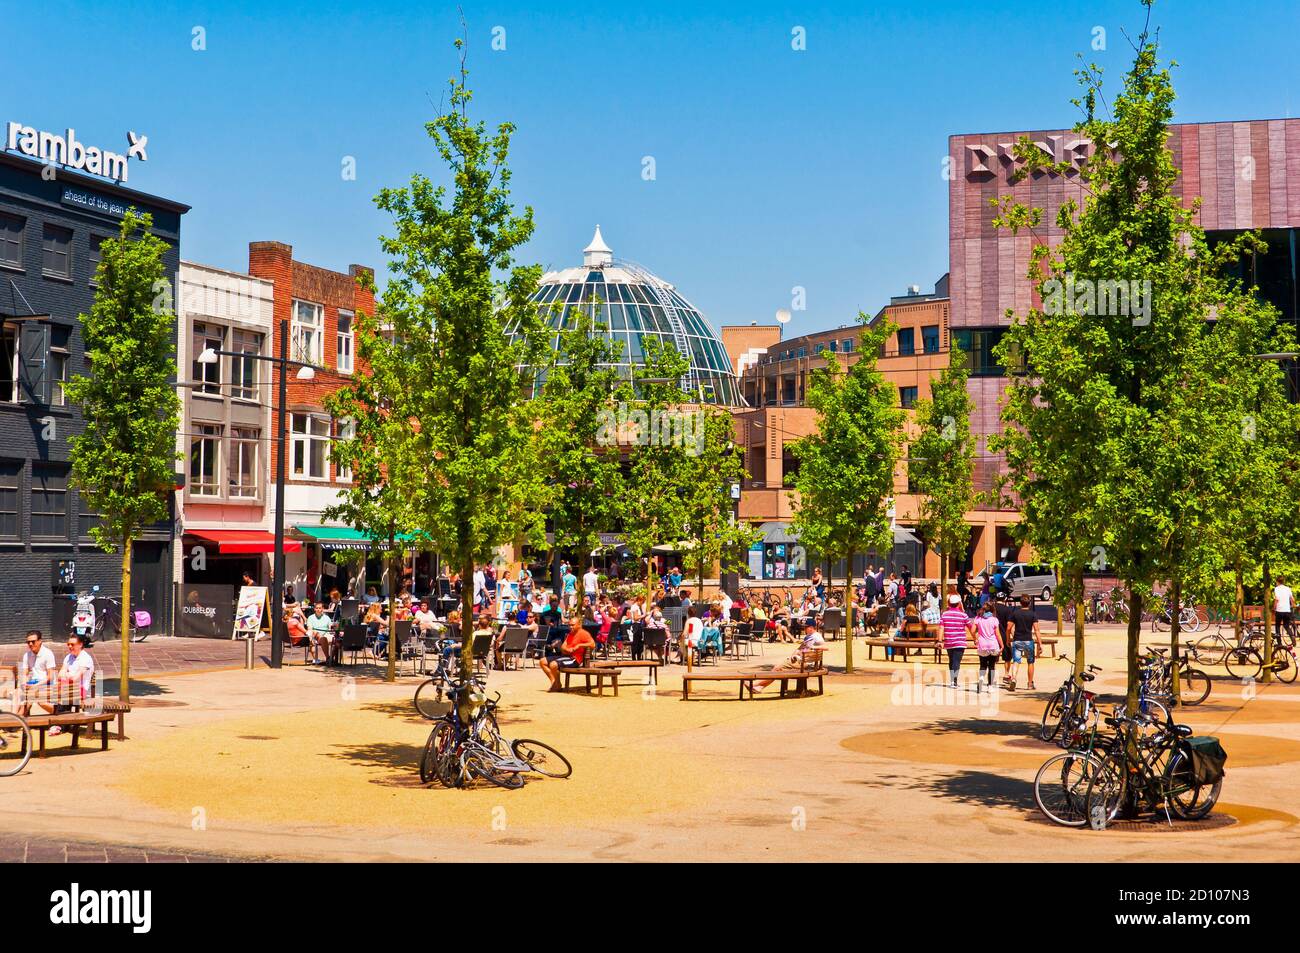 EINDHOVEN, THE NETHERLANDS - JUNE 8, 2013: Eindhoven City Center on a beautiful summer day. Dutch people enjoying a weekend in public squares. Stock Photo